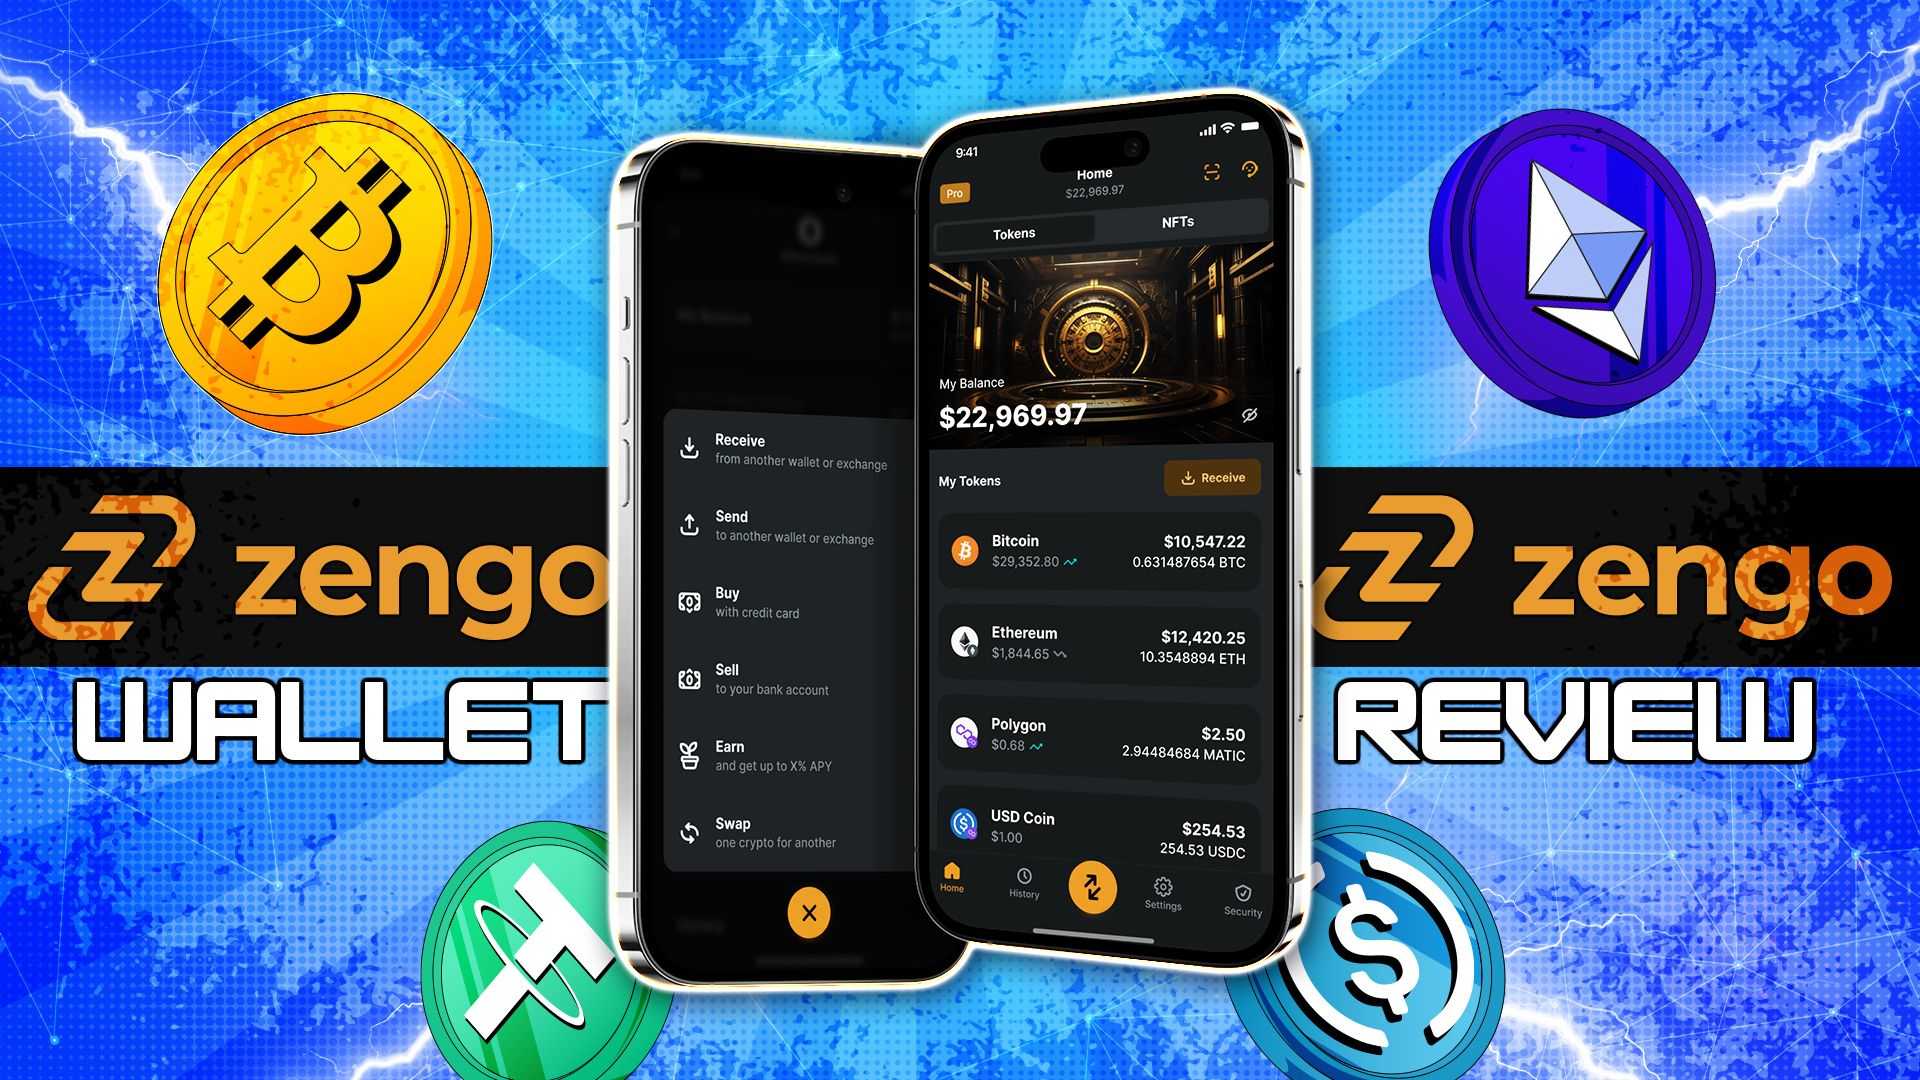 Zengo Wallet Review: A Revolution in Secure Self-Custody (No Seed Phrase!)